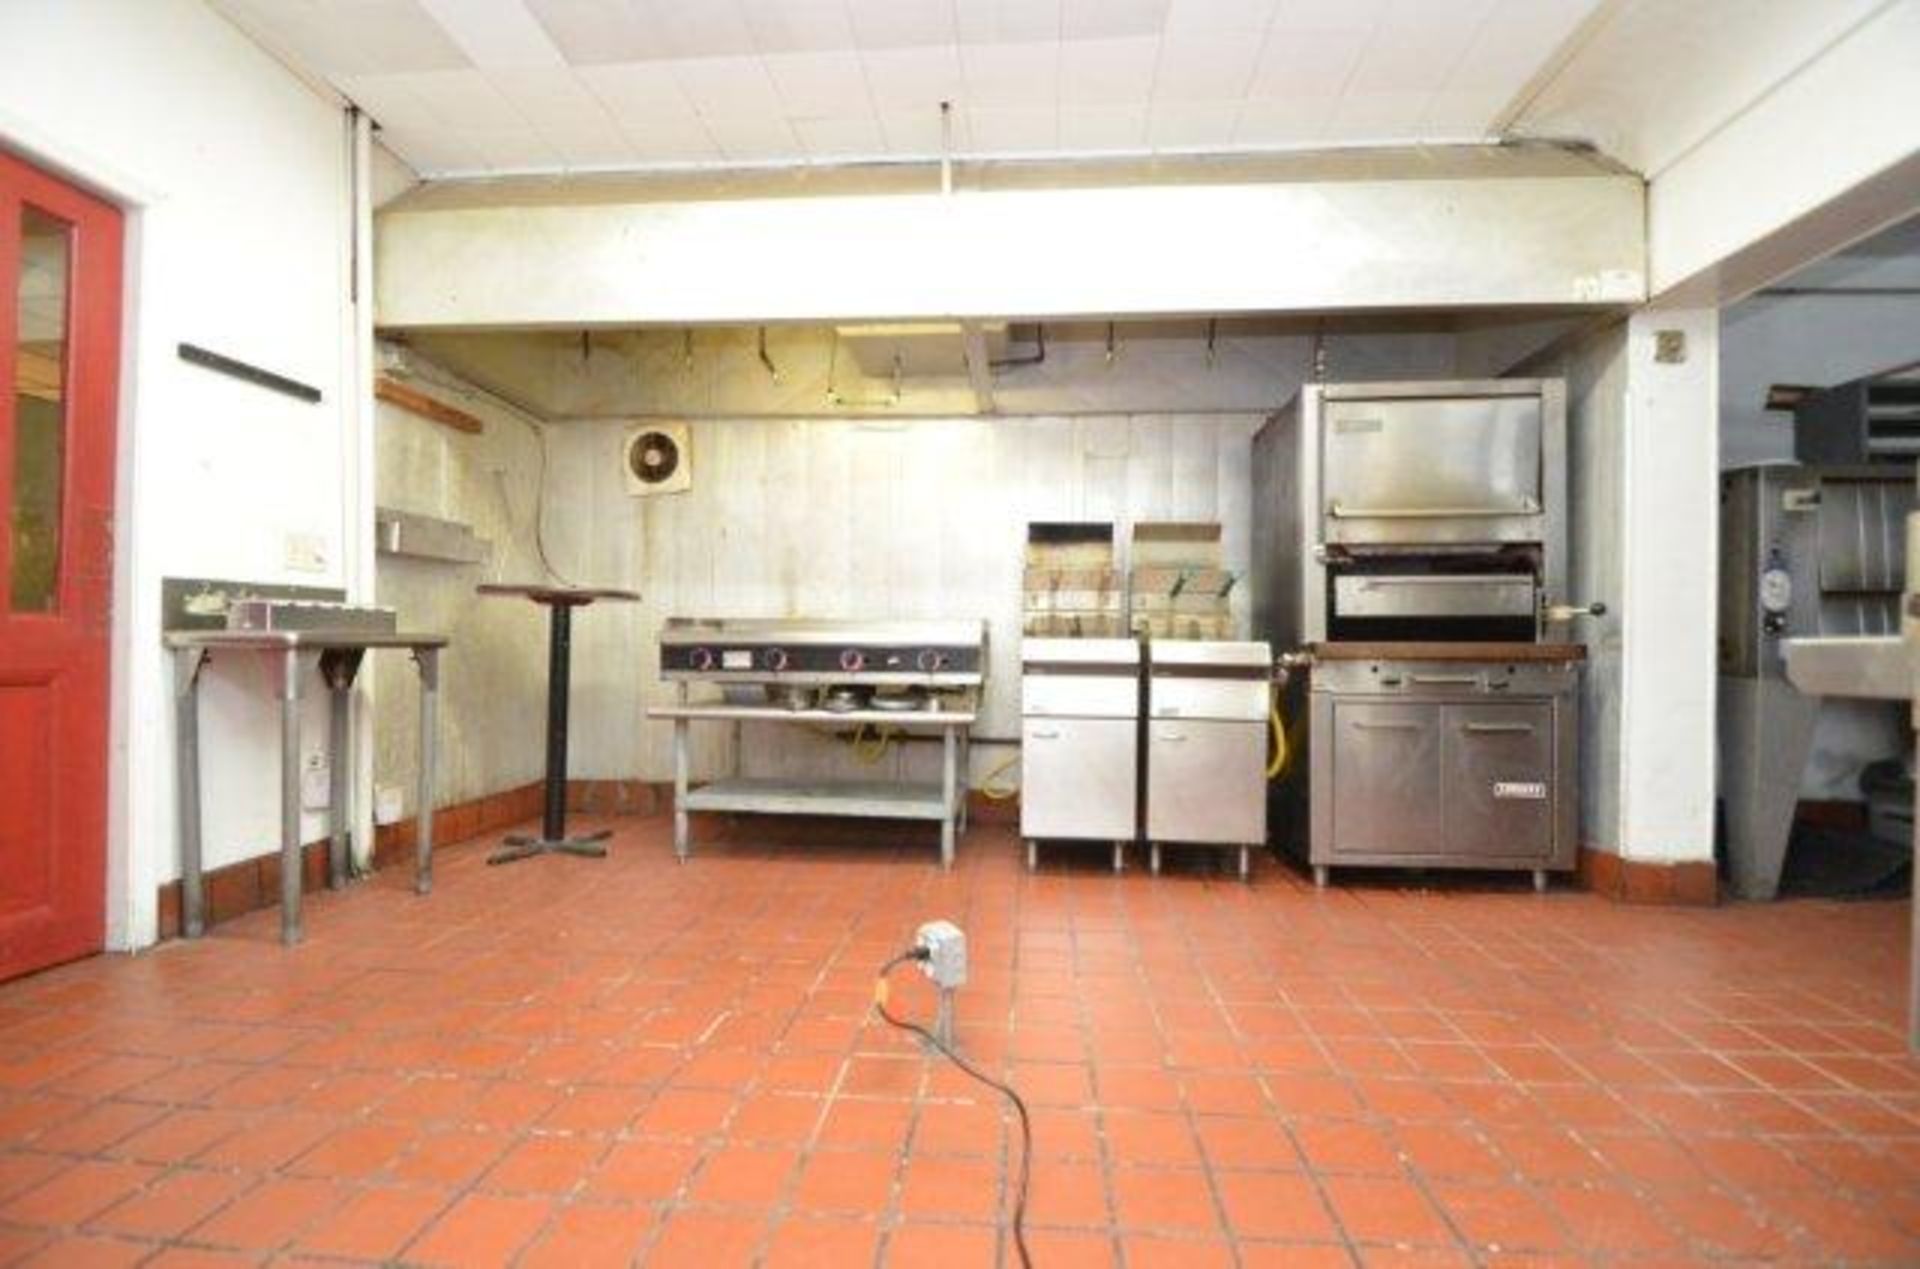 BULK BID: The Real Estate & Restaurant Equipment/Fixtures as a Whole. Lots 1 & 2. - Image 20 of 32